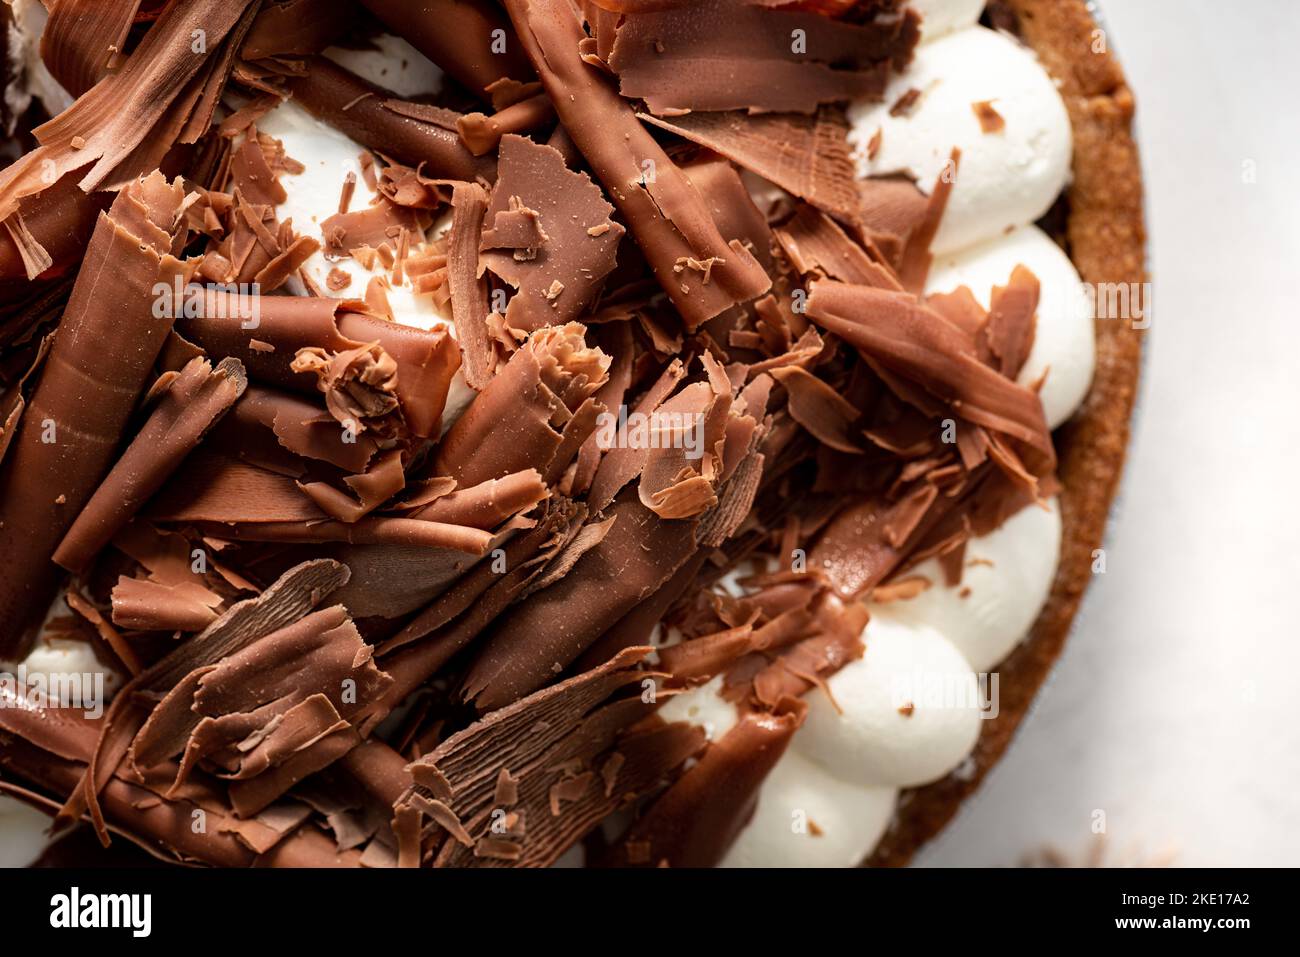 Close up overhead shot of chocolate pie with chocolate shavings Stock Photo